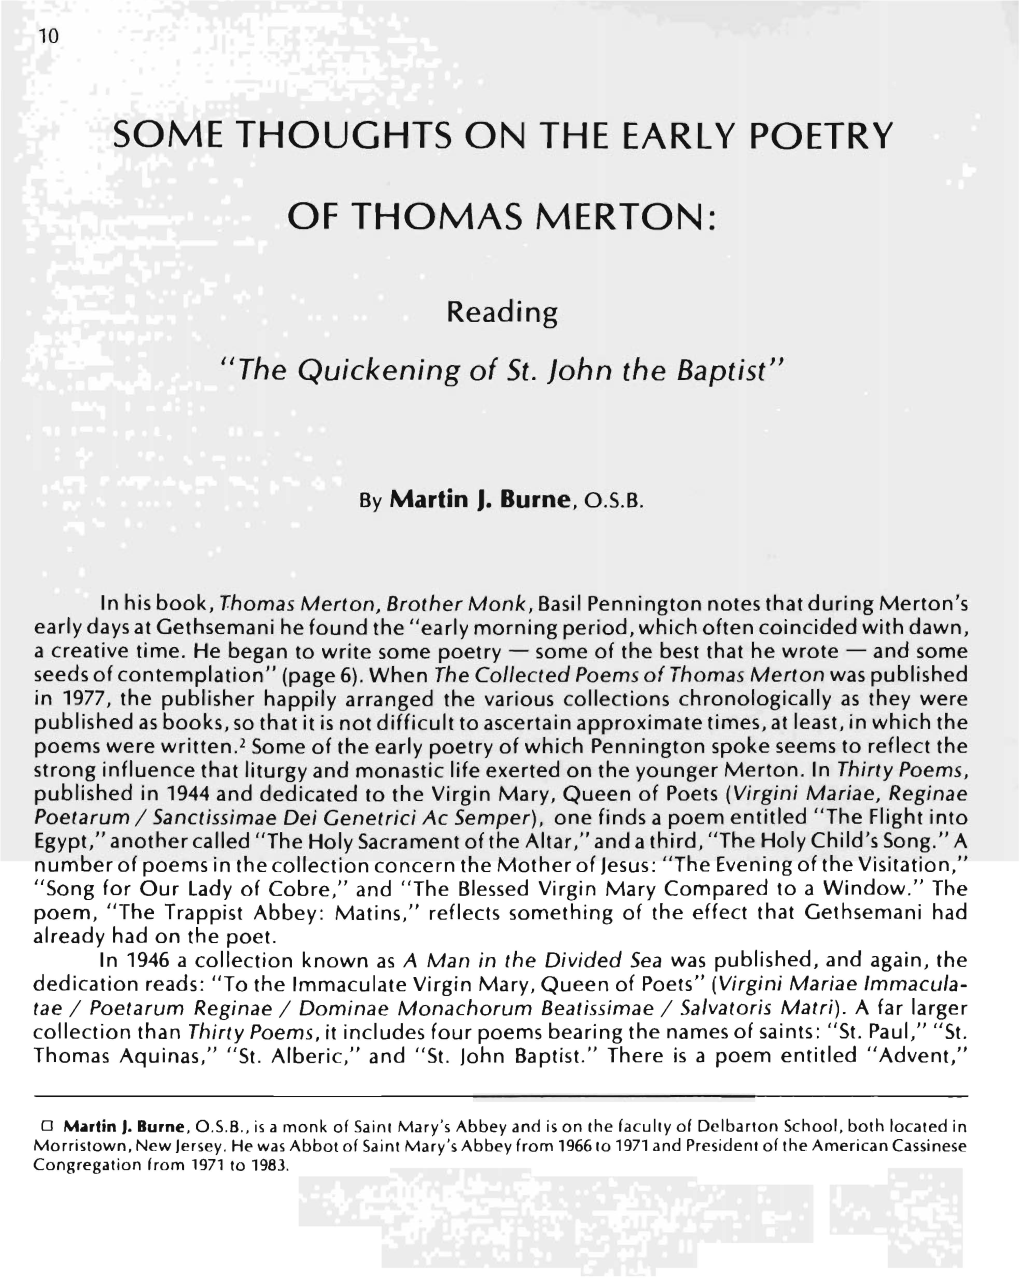 Some Thoughts on the Early Poetry of Thomas Merton